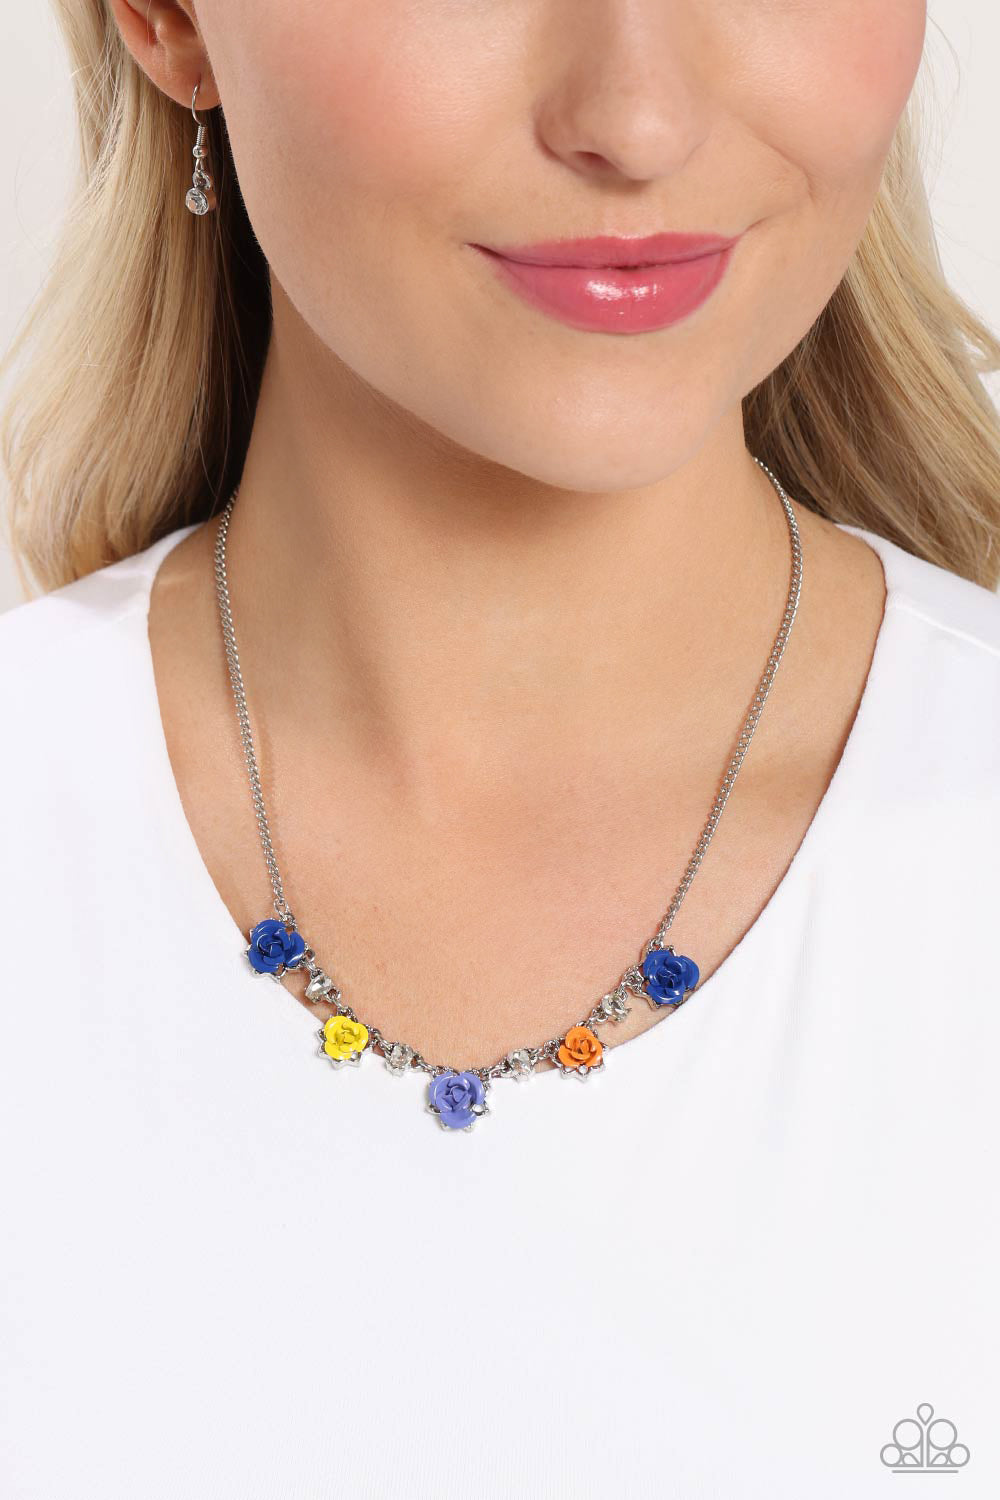 Strike a Rose - Multi Color Necklace - Paparazzi Accessories - Painted in Persian Jewel, High Visibility, French Blue, and orange hues, various metal roses delicately alternate with upside-down white teardrop gems across a dainty silver chain, blooming into a seasonal centerpiece.